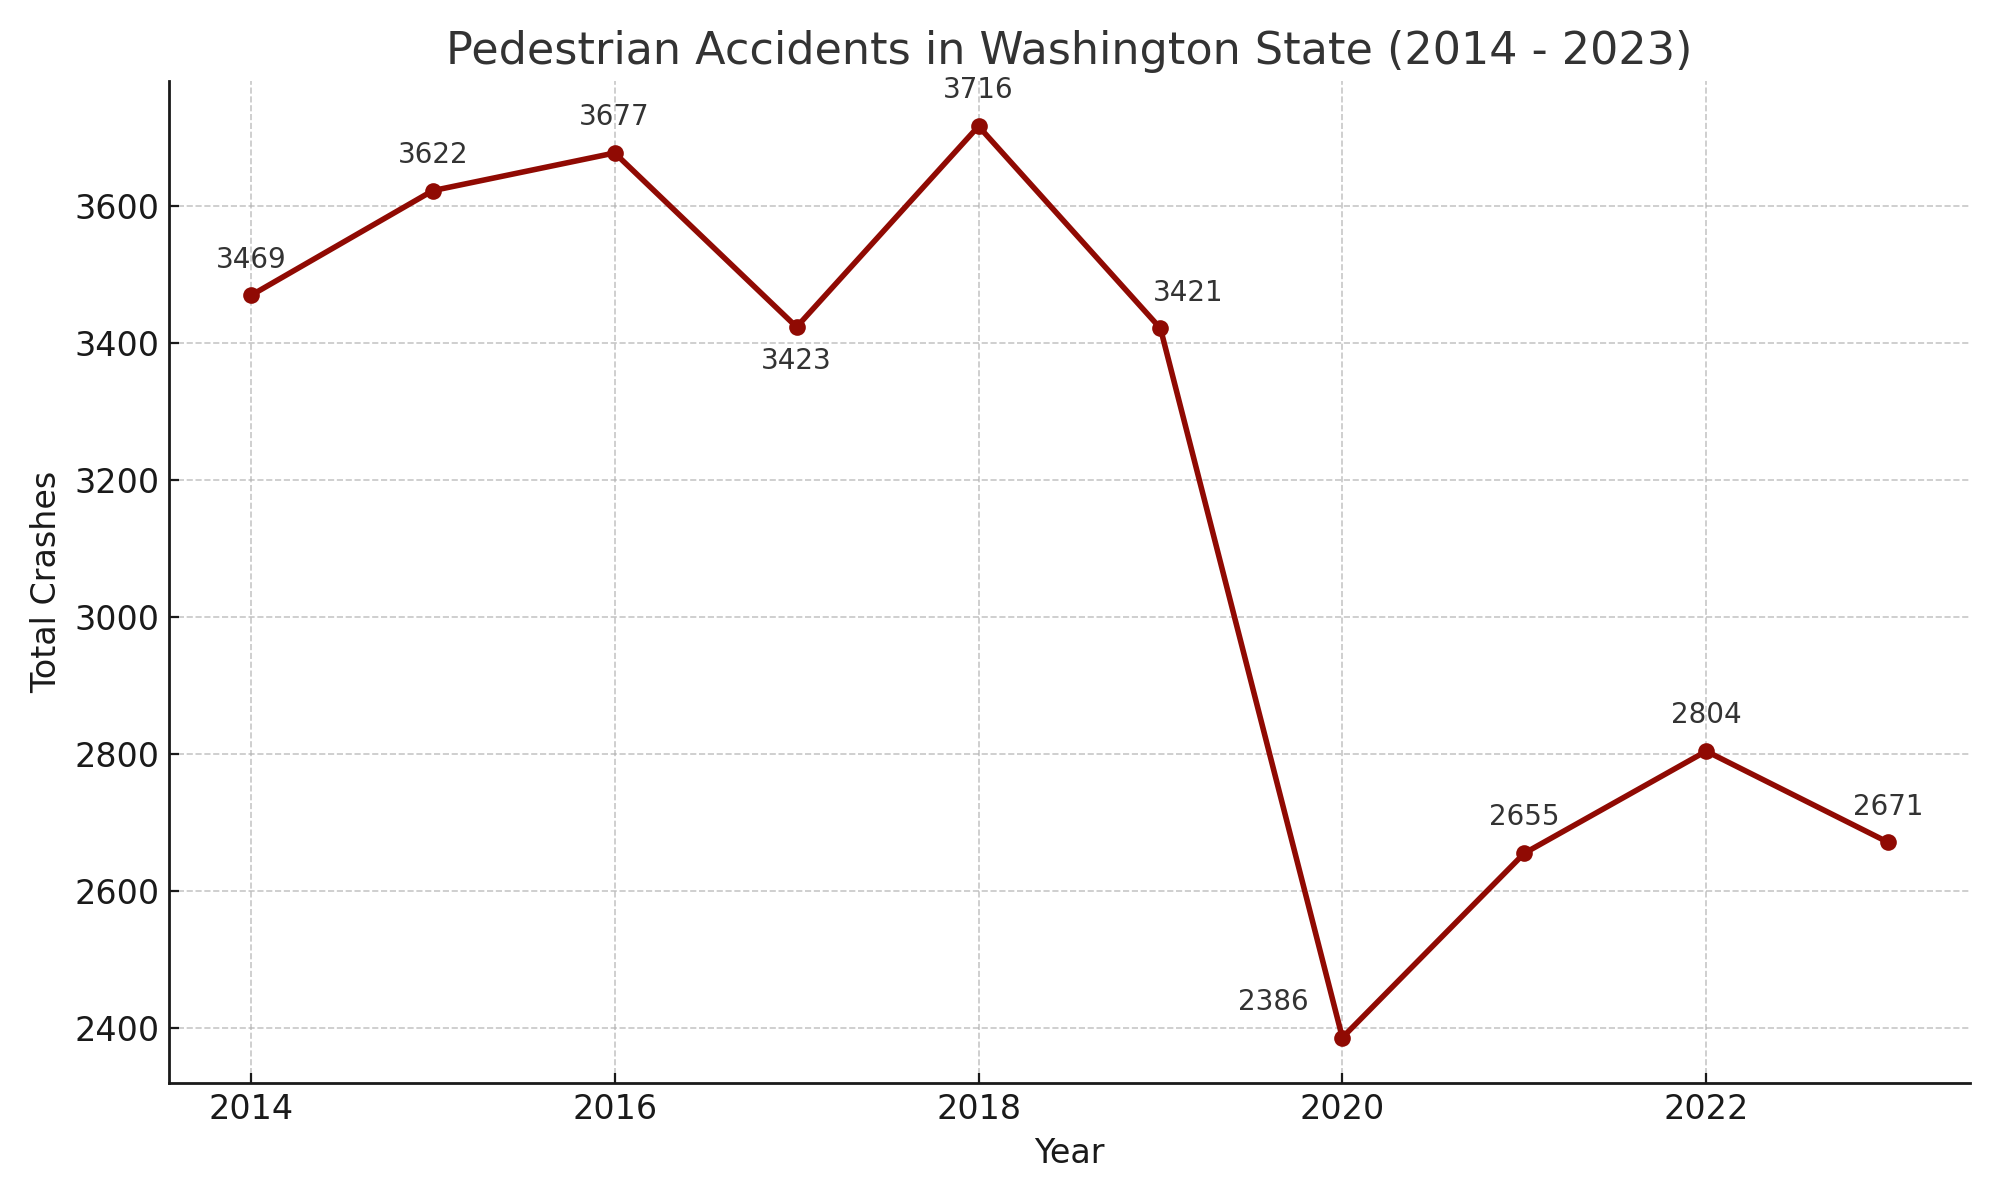 Line graph displaying pedestrian accidents in Washington State from 2014 to 2023, with each year's total accidents marked by a bullet point. The line is thick and colored in #900A03, indicating the fluctuation of accidents over the decade, with specific annotations for years 2017, 2019, and 2020 to highlight changes in accident counts.